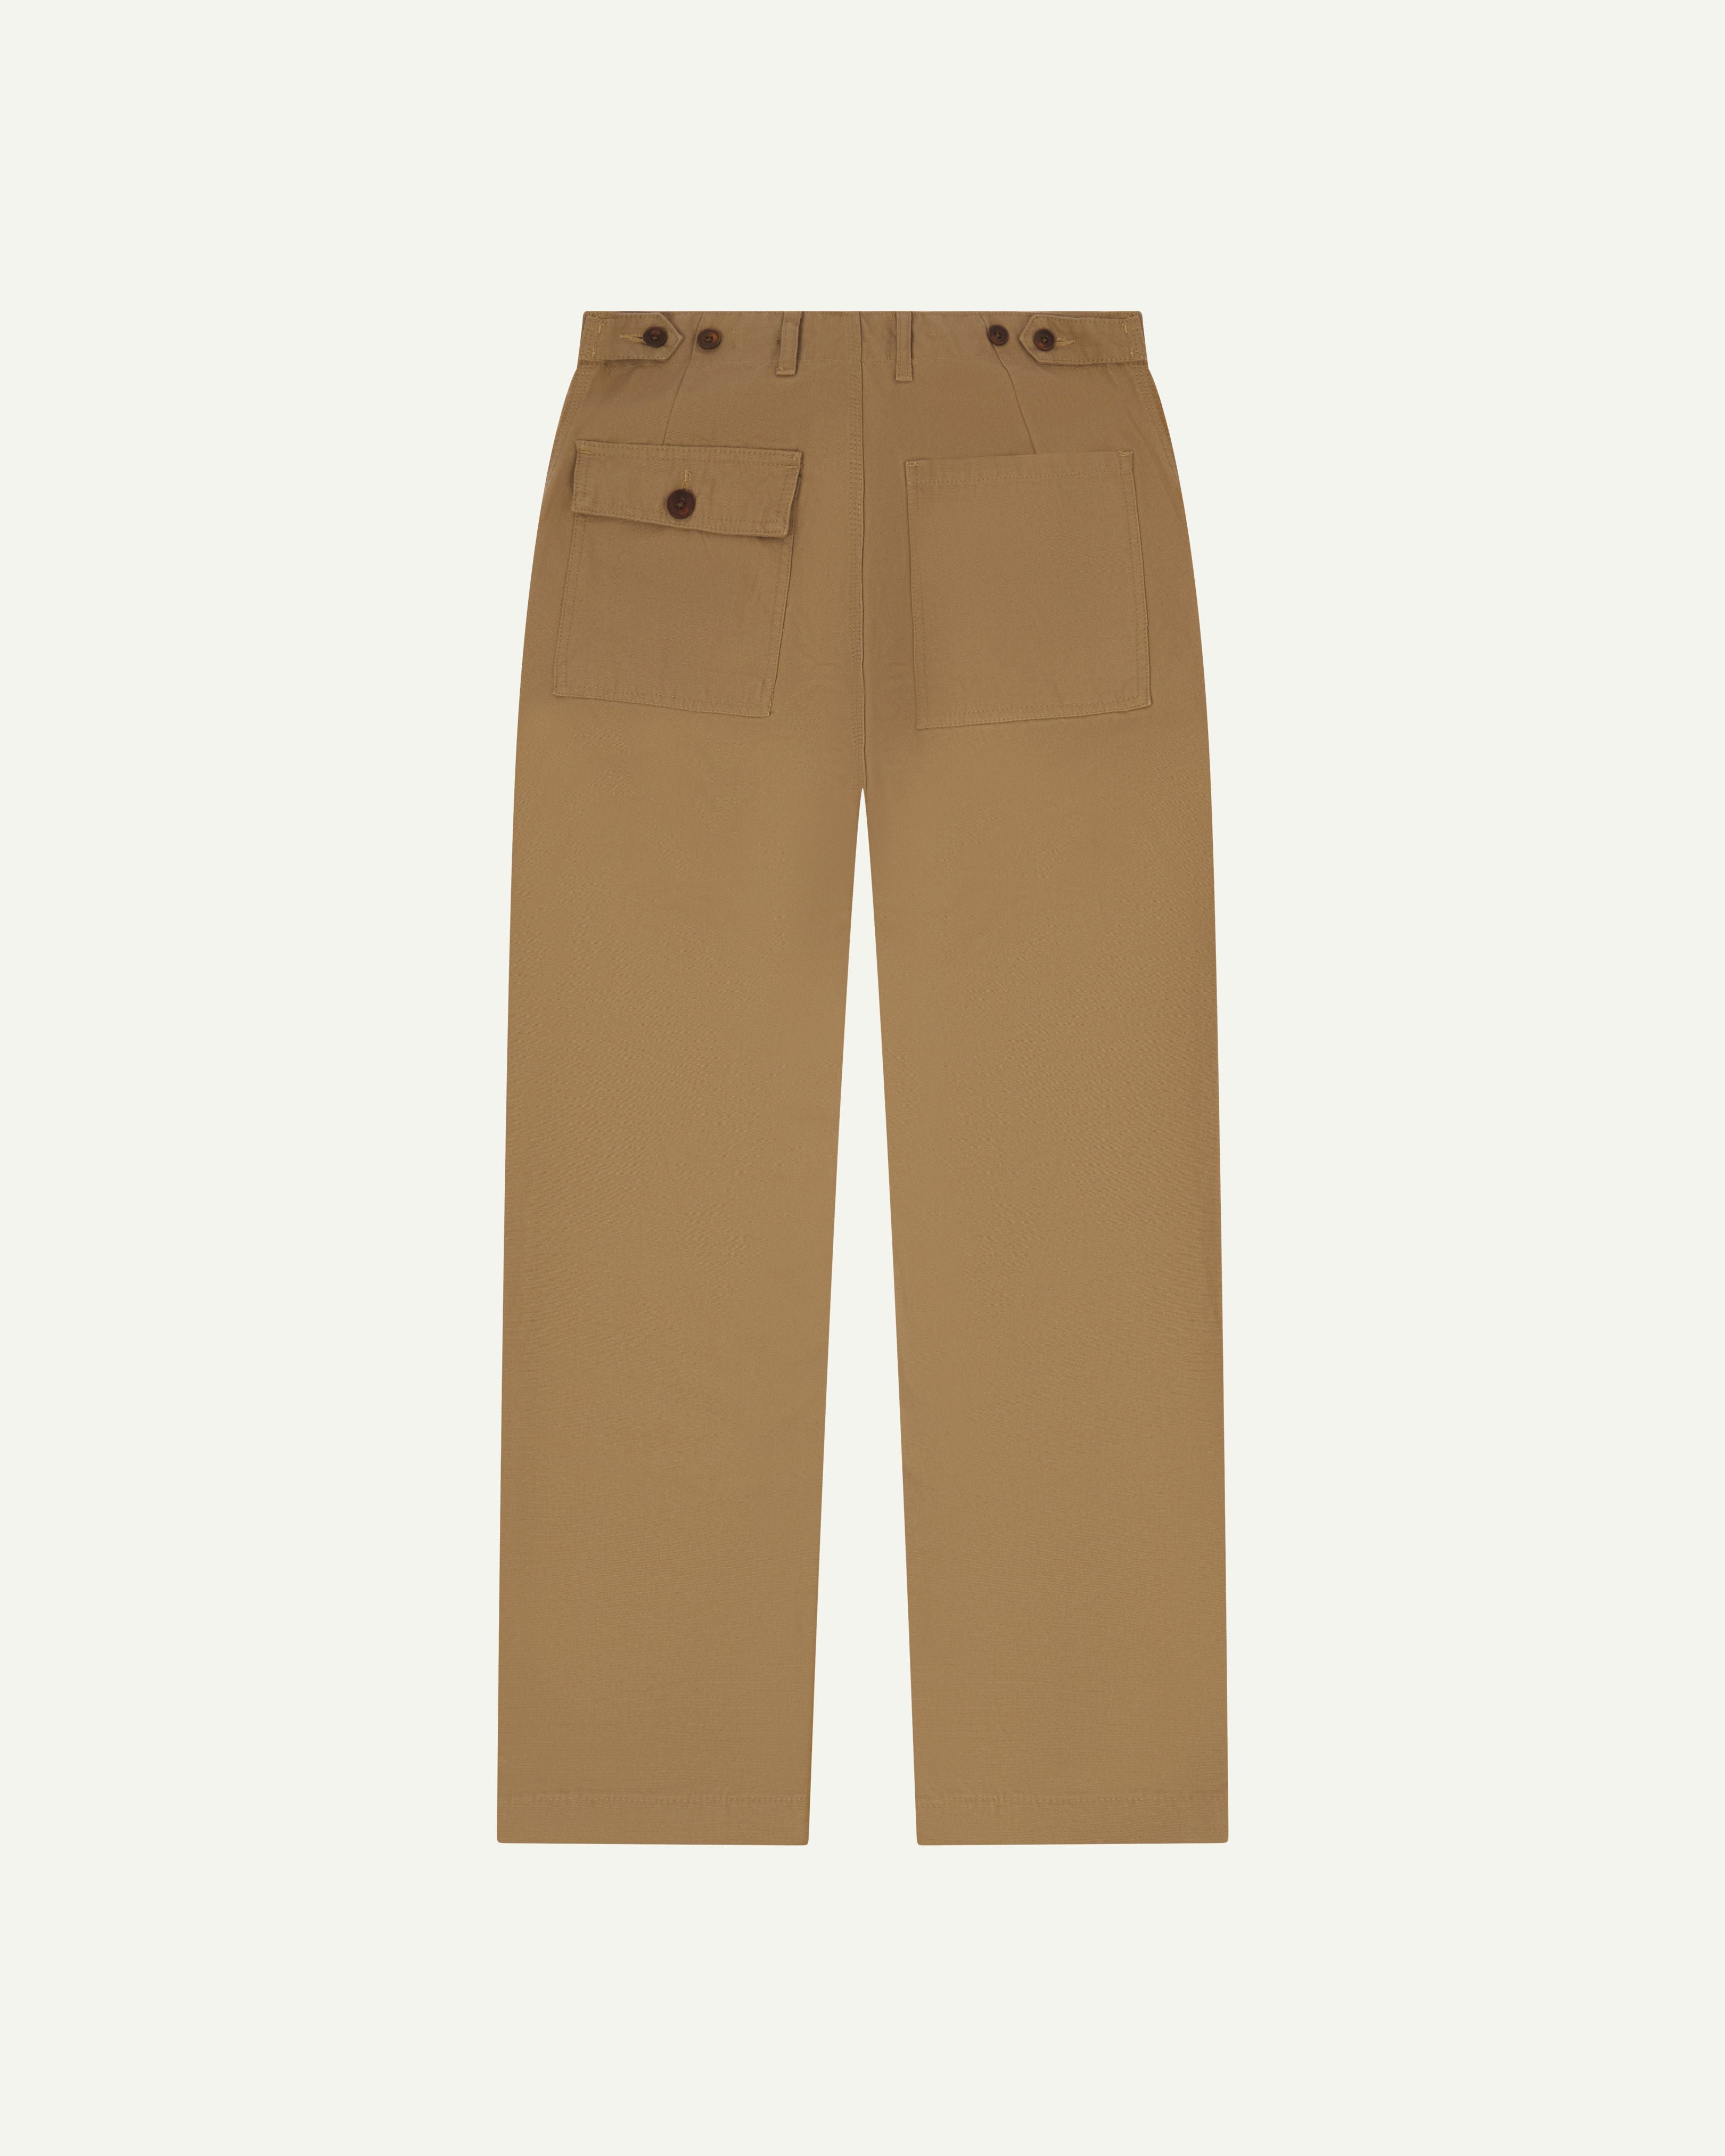 Back flat shot of Uskees men's organic cotton khaki casual trousers. on white background showing waist adjuster buttons